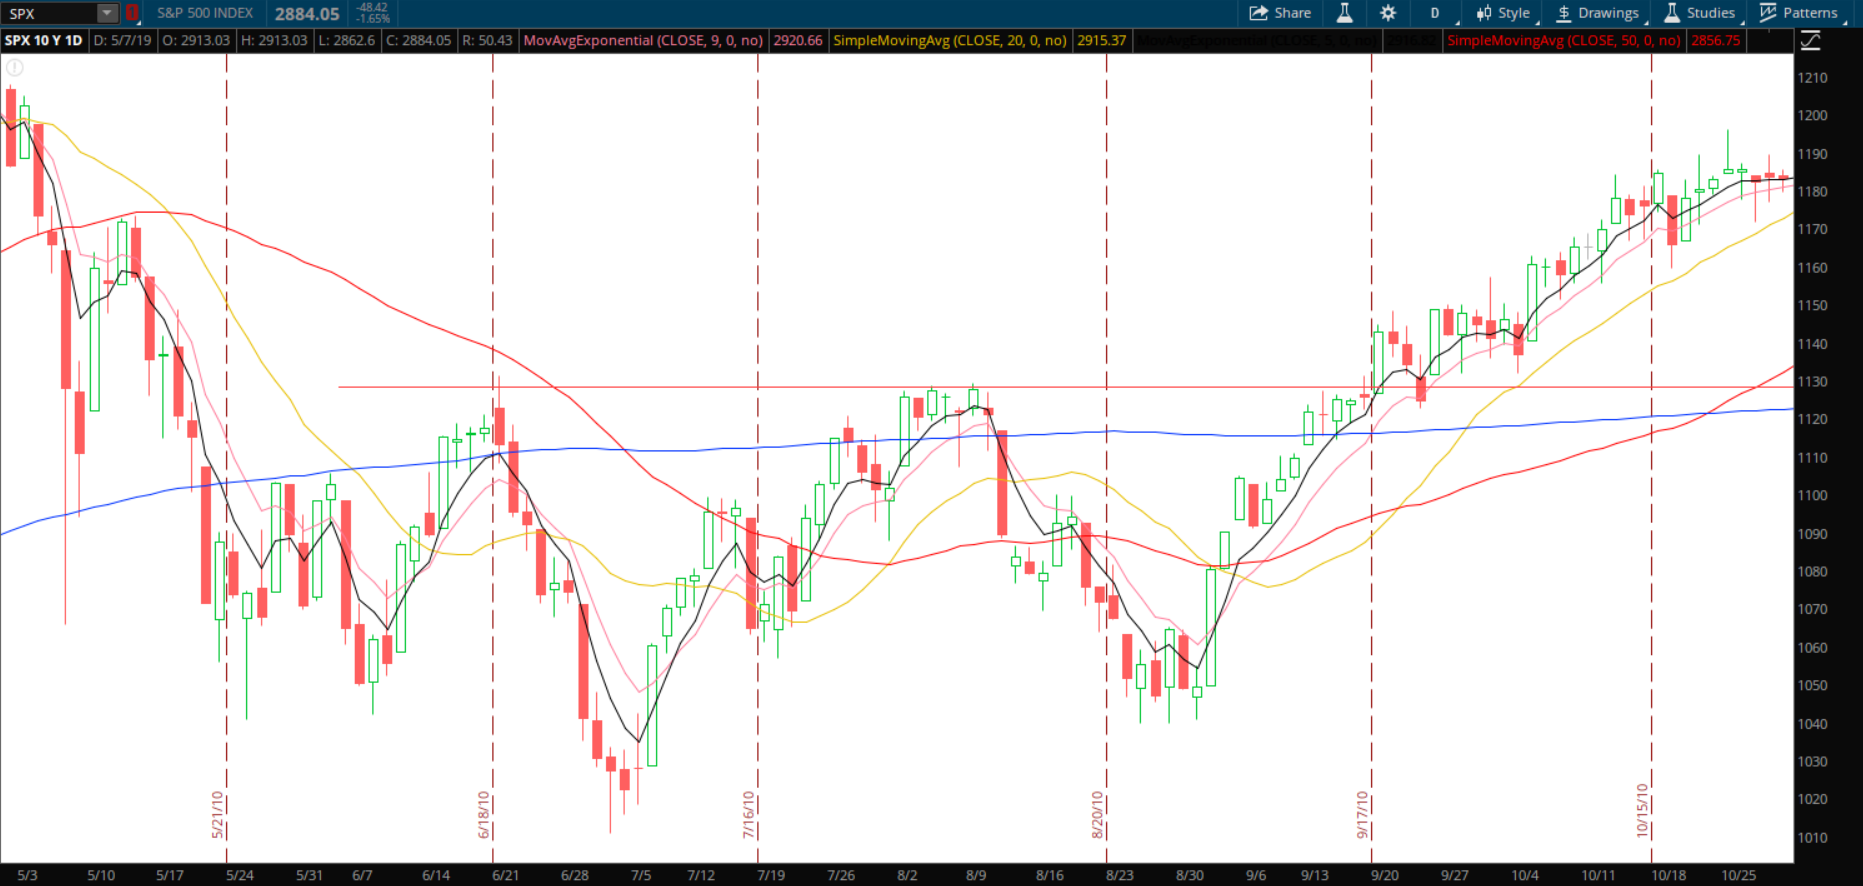 $SPX Chart: May to October 2010